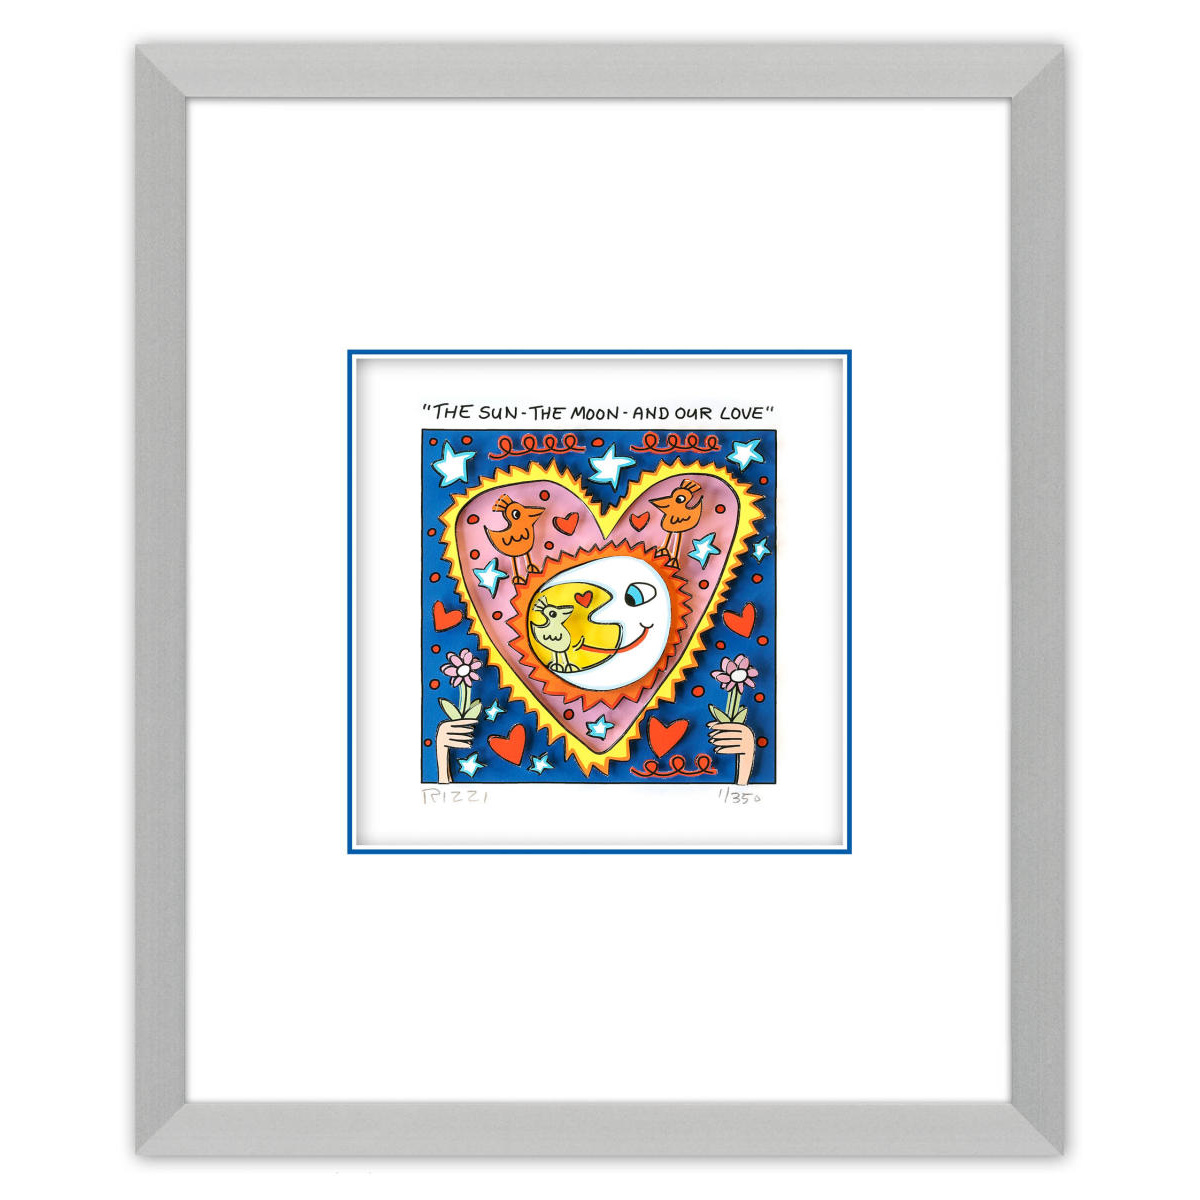 THE SUN – THE MOON – AND OUR LOVE von James Rizzi